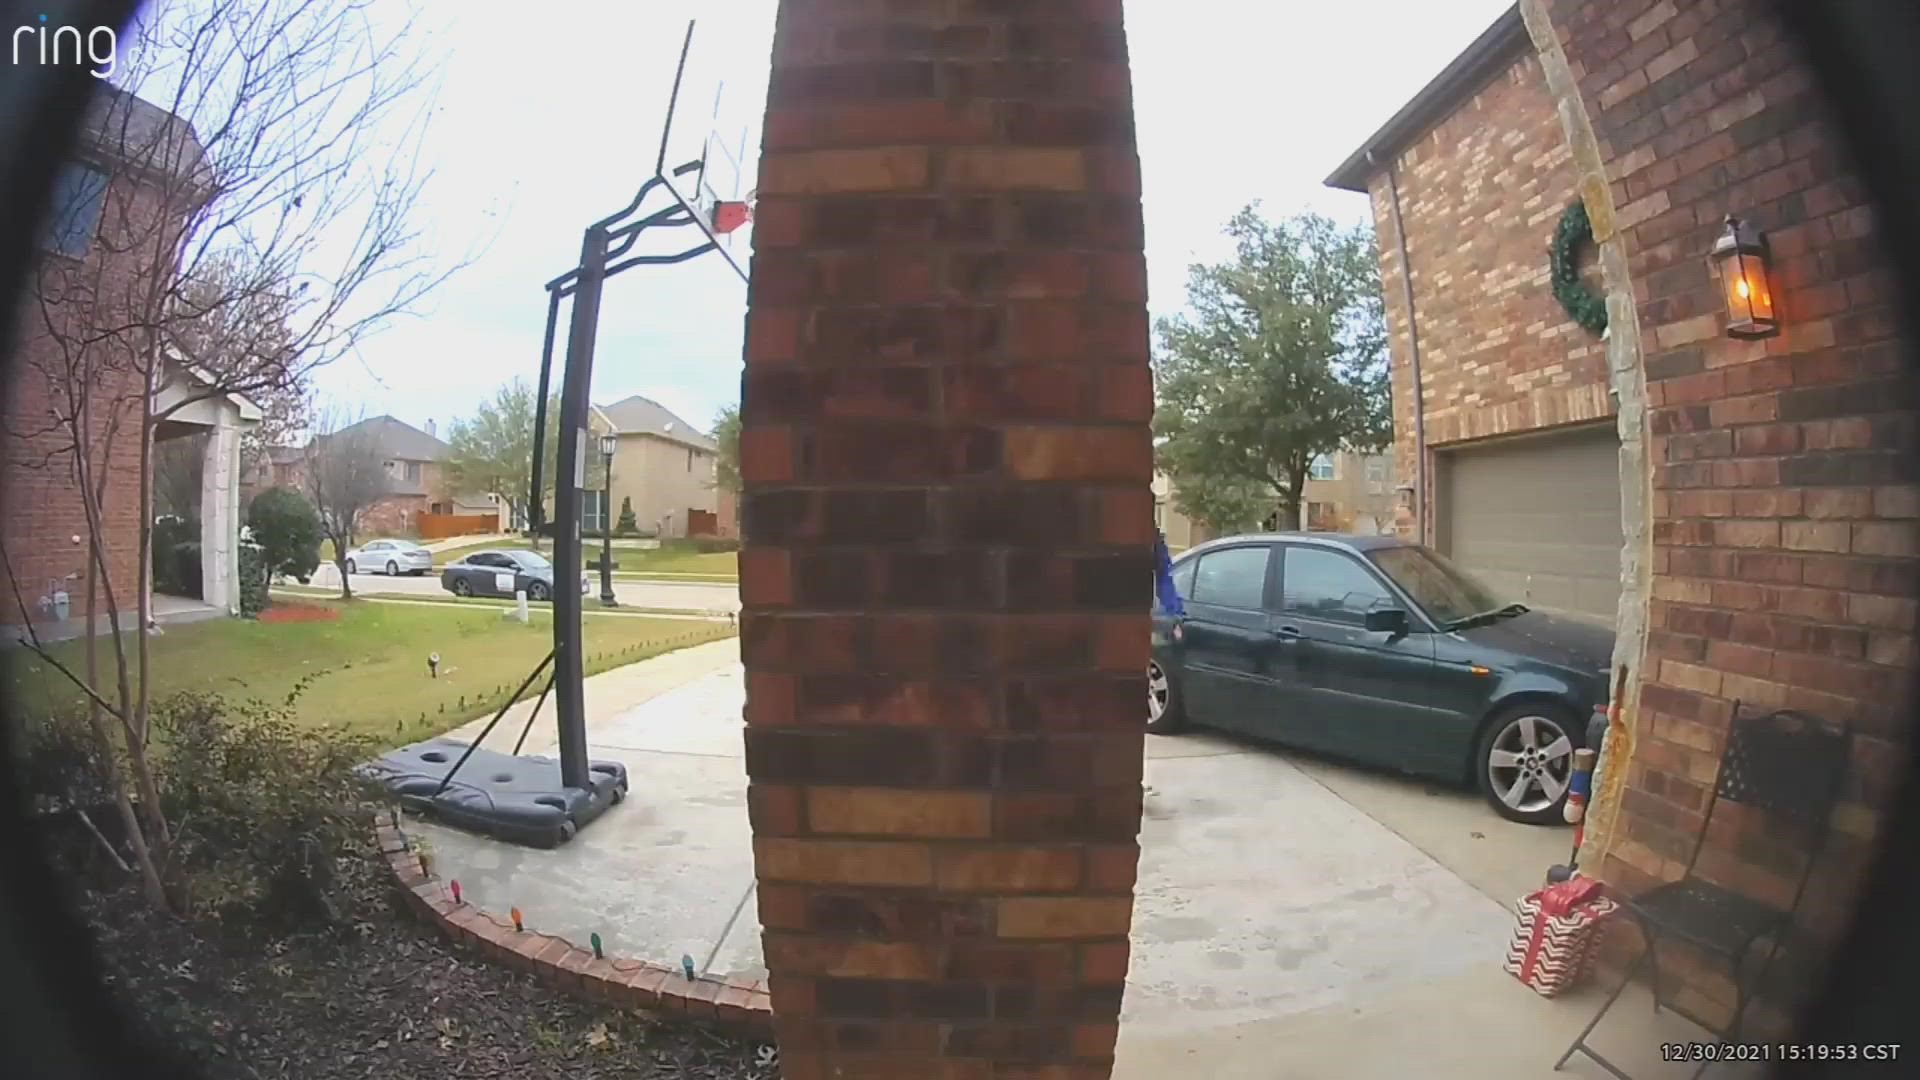 When KenJar Williams' daughter's sandwich went missing, she suspected the delivery guy. The doorbell camera caught a different suspect, the neighbor's dog.